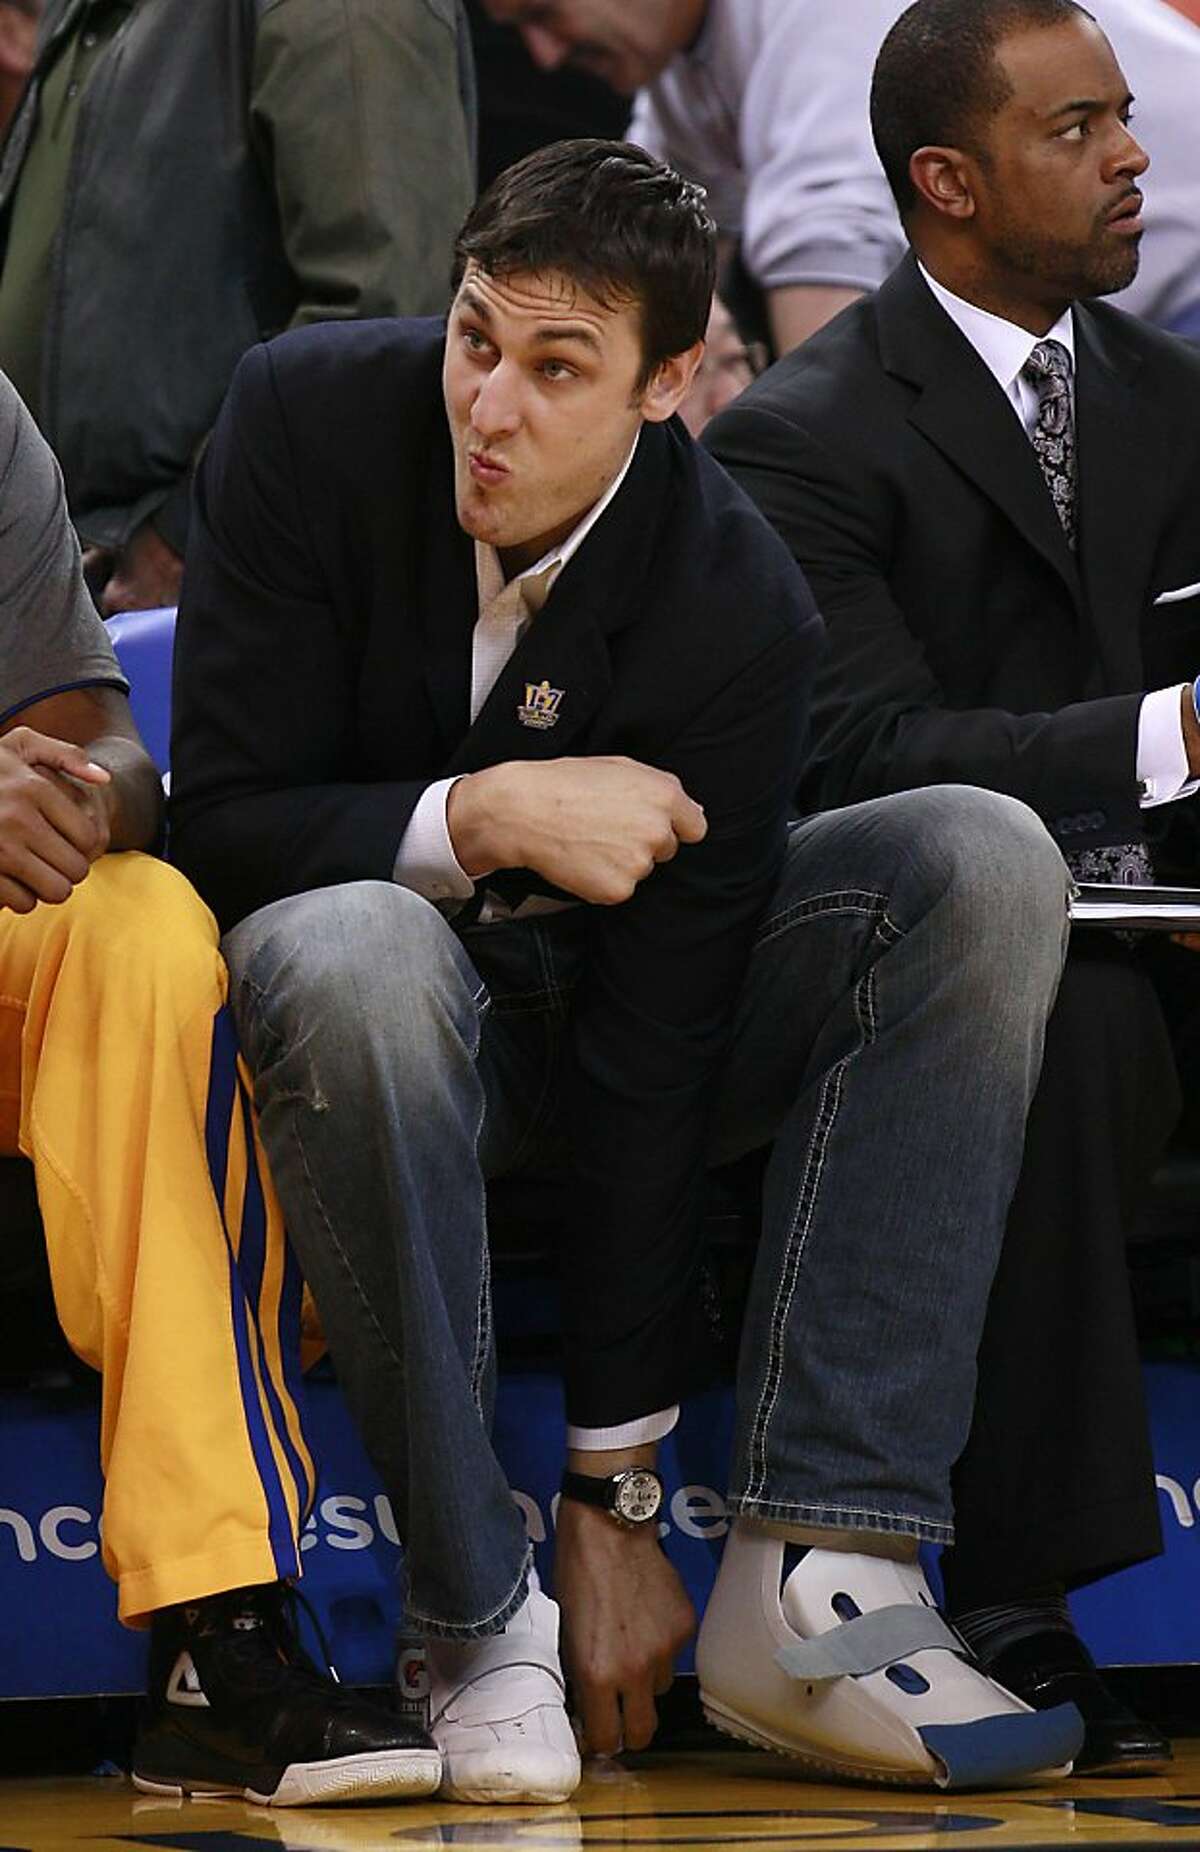 Golden State Warriors center Andrew Bogut, from Australia, sits on the bench during an NBA basketball game against the Minnesota Timberwolves in Oakland, Calif., Monday, March 19, 2012. (AP Photo/Jeff Chiu)